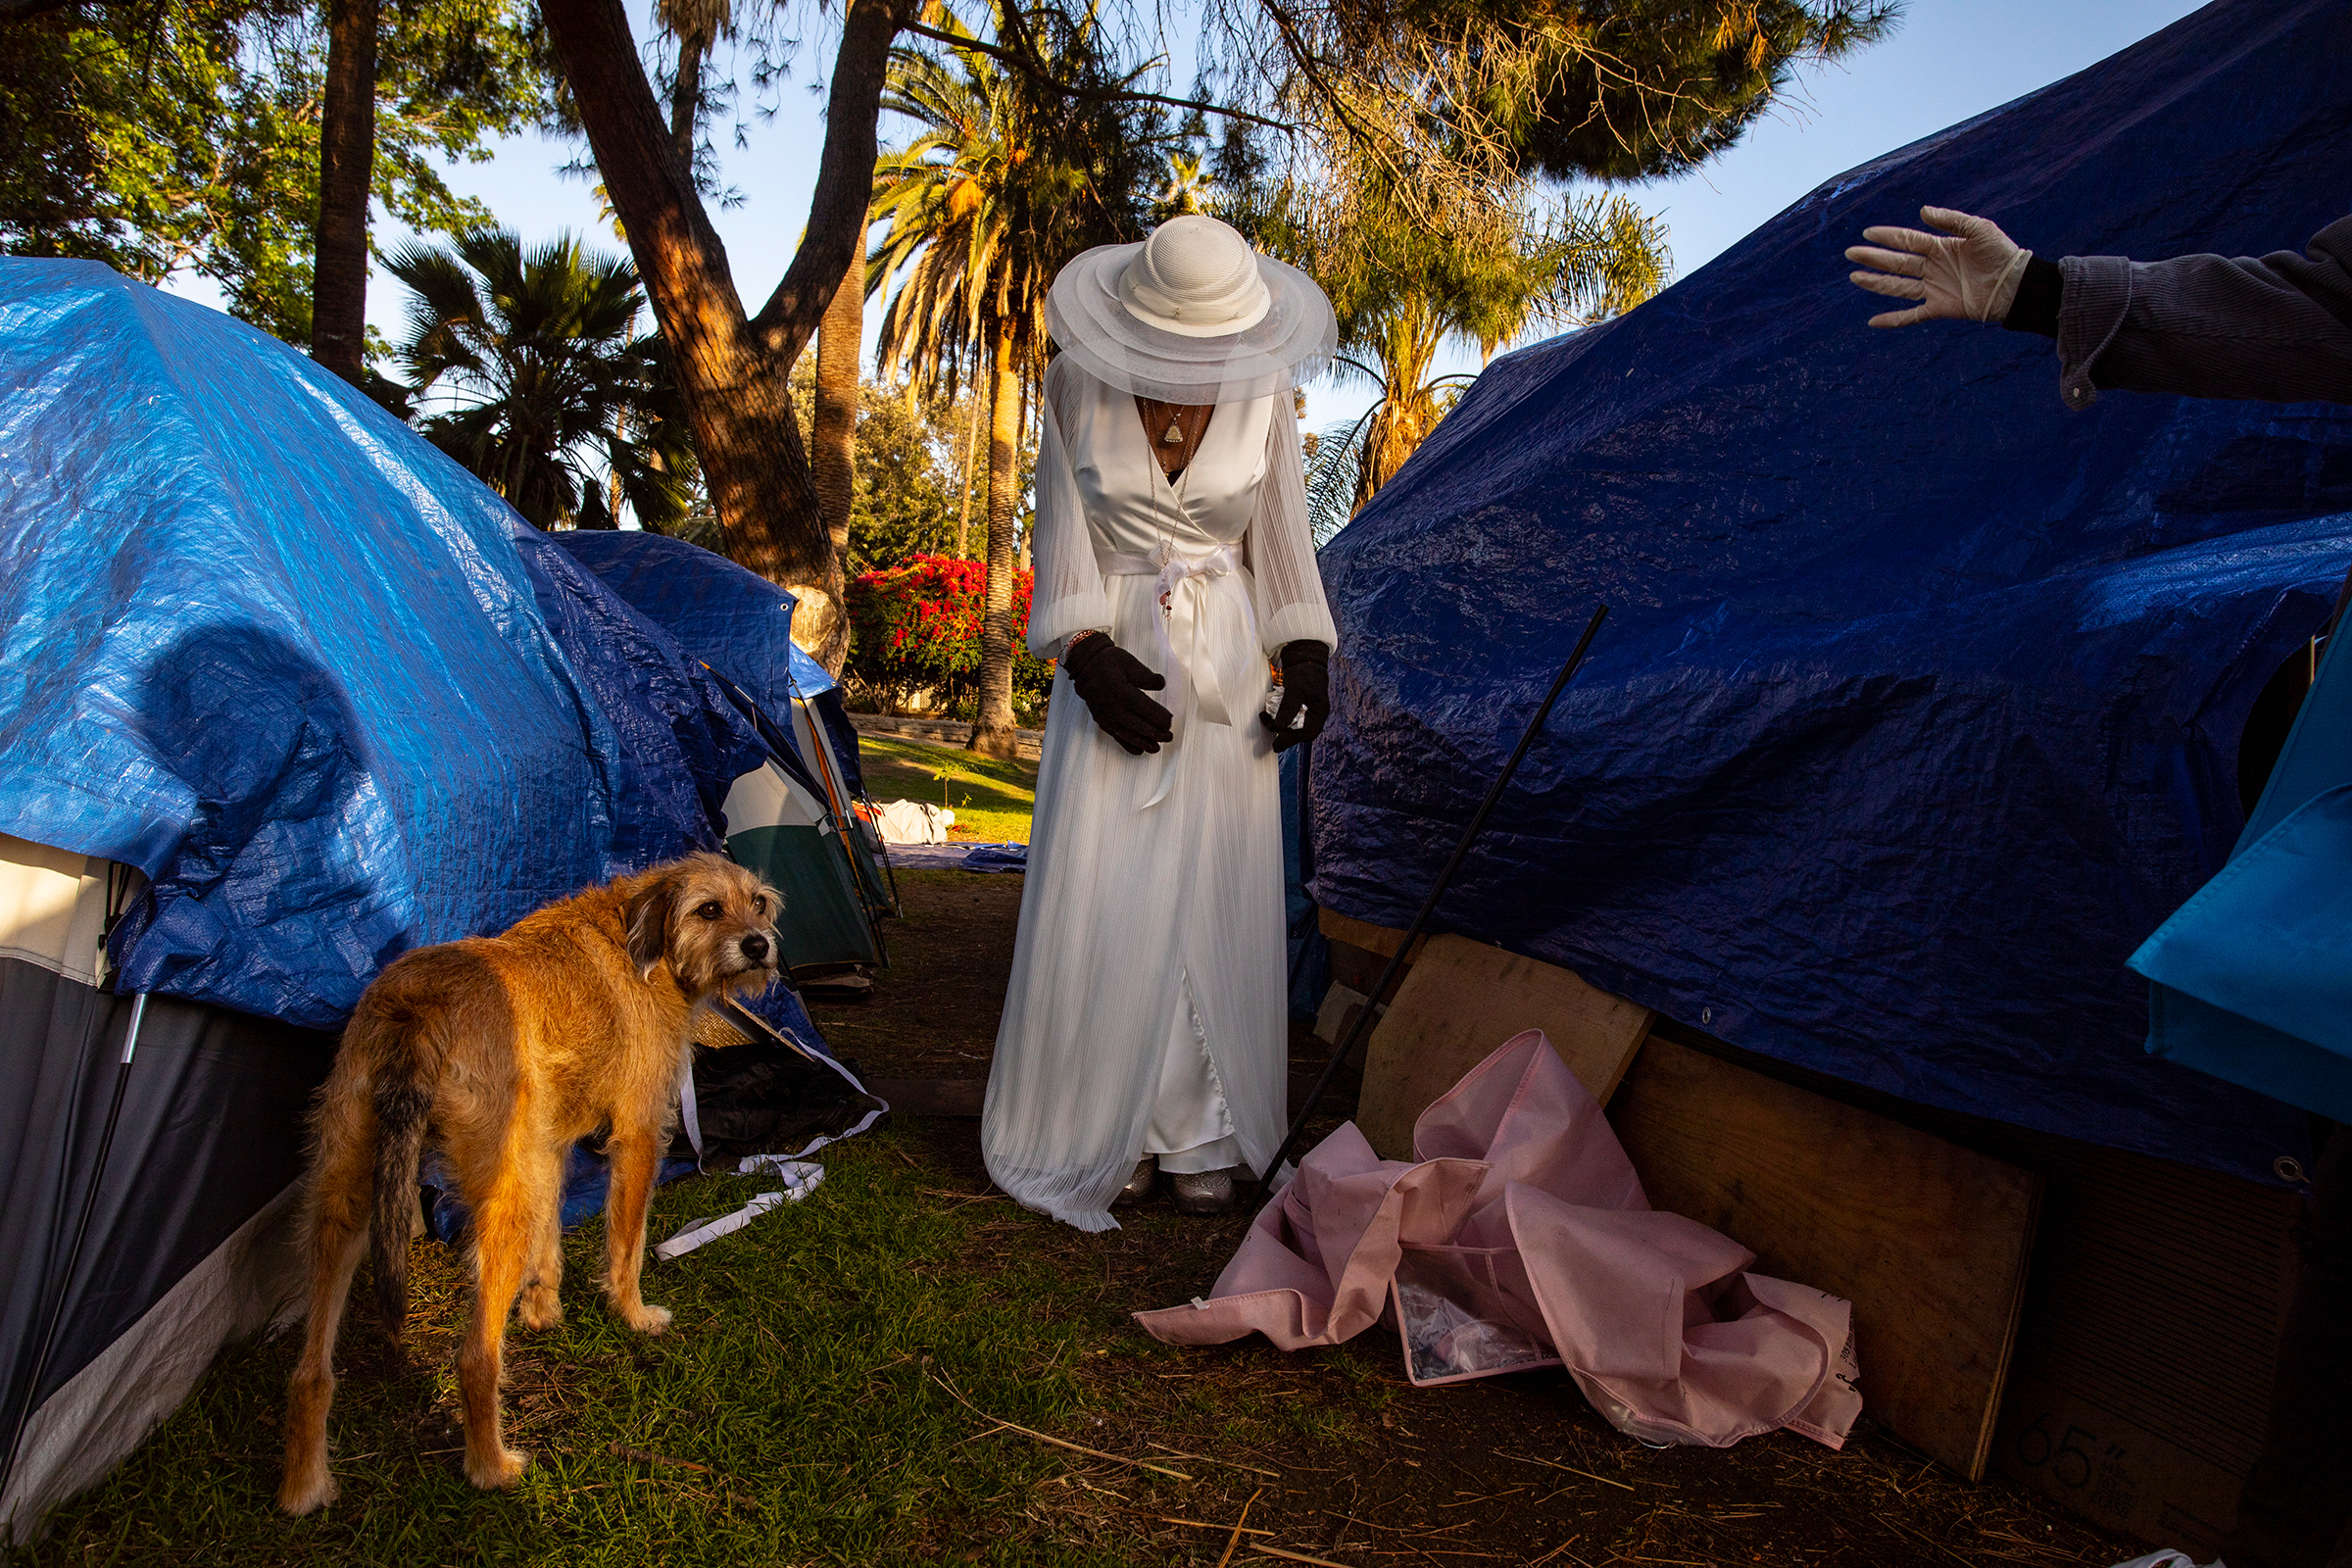 Valerie Zeller, 52, cries during her first-ever wedding dress fitting by the side of her tent in Echo Park Lake, in Los Angeles, on March 13. A seamstress donated a dress and assisted with a fitting a week before the wedding to be sure the alterations would be ready for Zeller's special day. Days after the <a href="https://www.washingtonpost.com/magazine/2021/07/06/wedding-homeless-couple-what-happened-next/">March 20 wedding</a>, the unhoused community of Echo Park Lake was evicted. (Barbara Davidson—Getty Images)